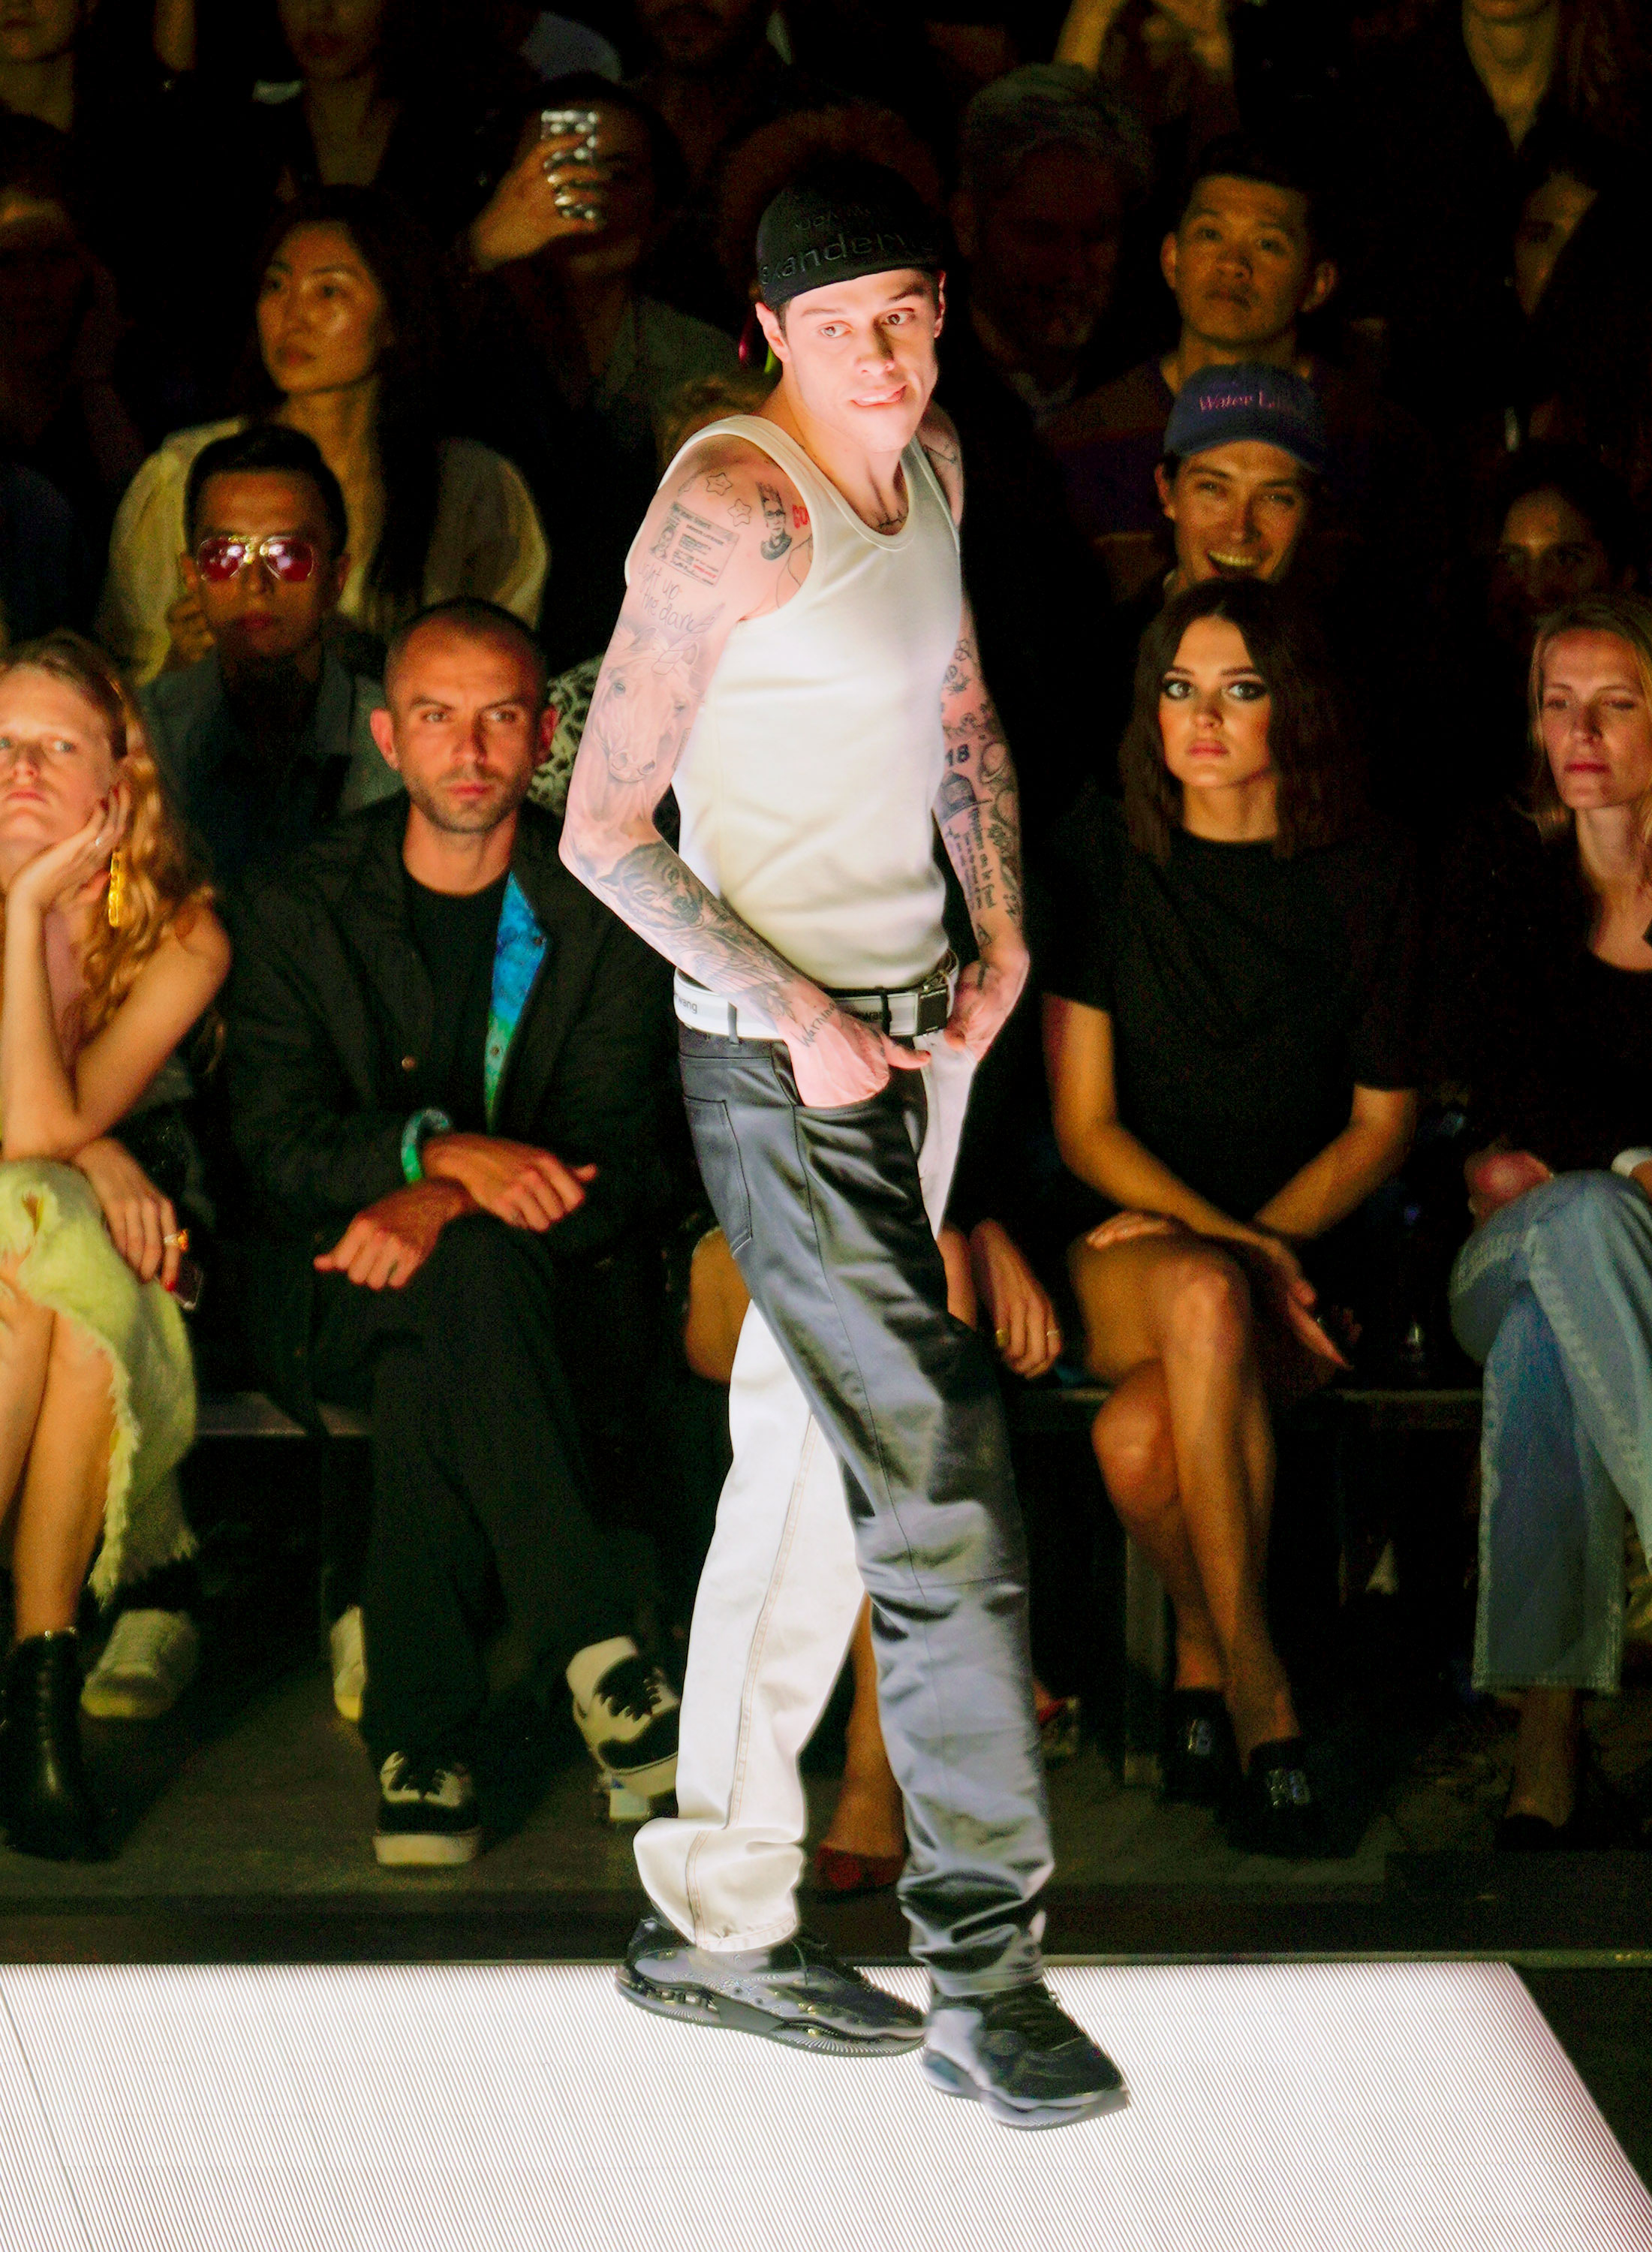 Pete-Davidson-Started-Out-Awkward-But-Finished-Confident-in-Runway-Debut-at-Alexander-Wang-Fashion-Show-04.jpg